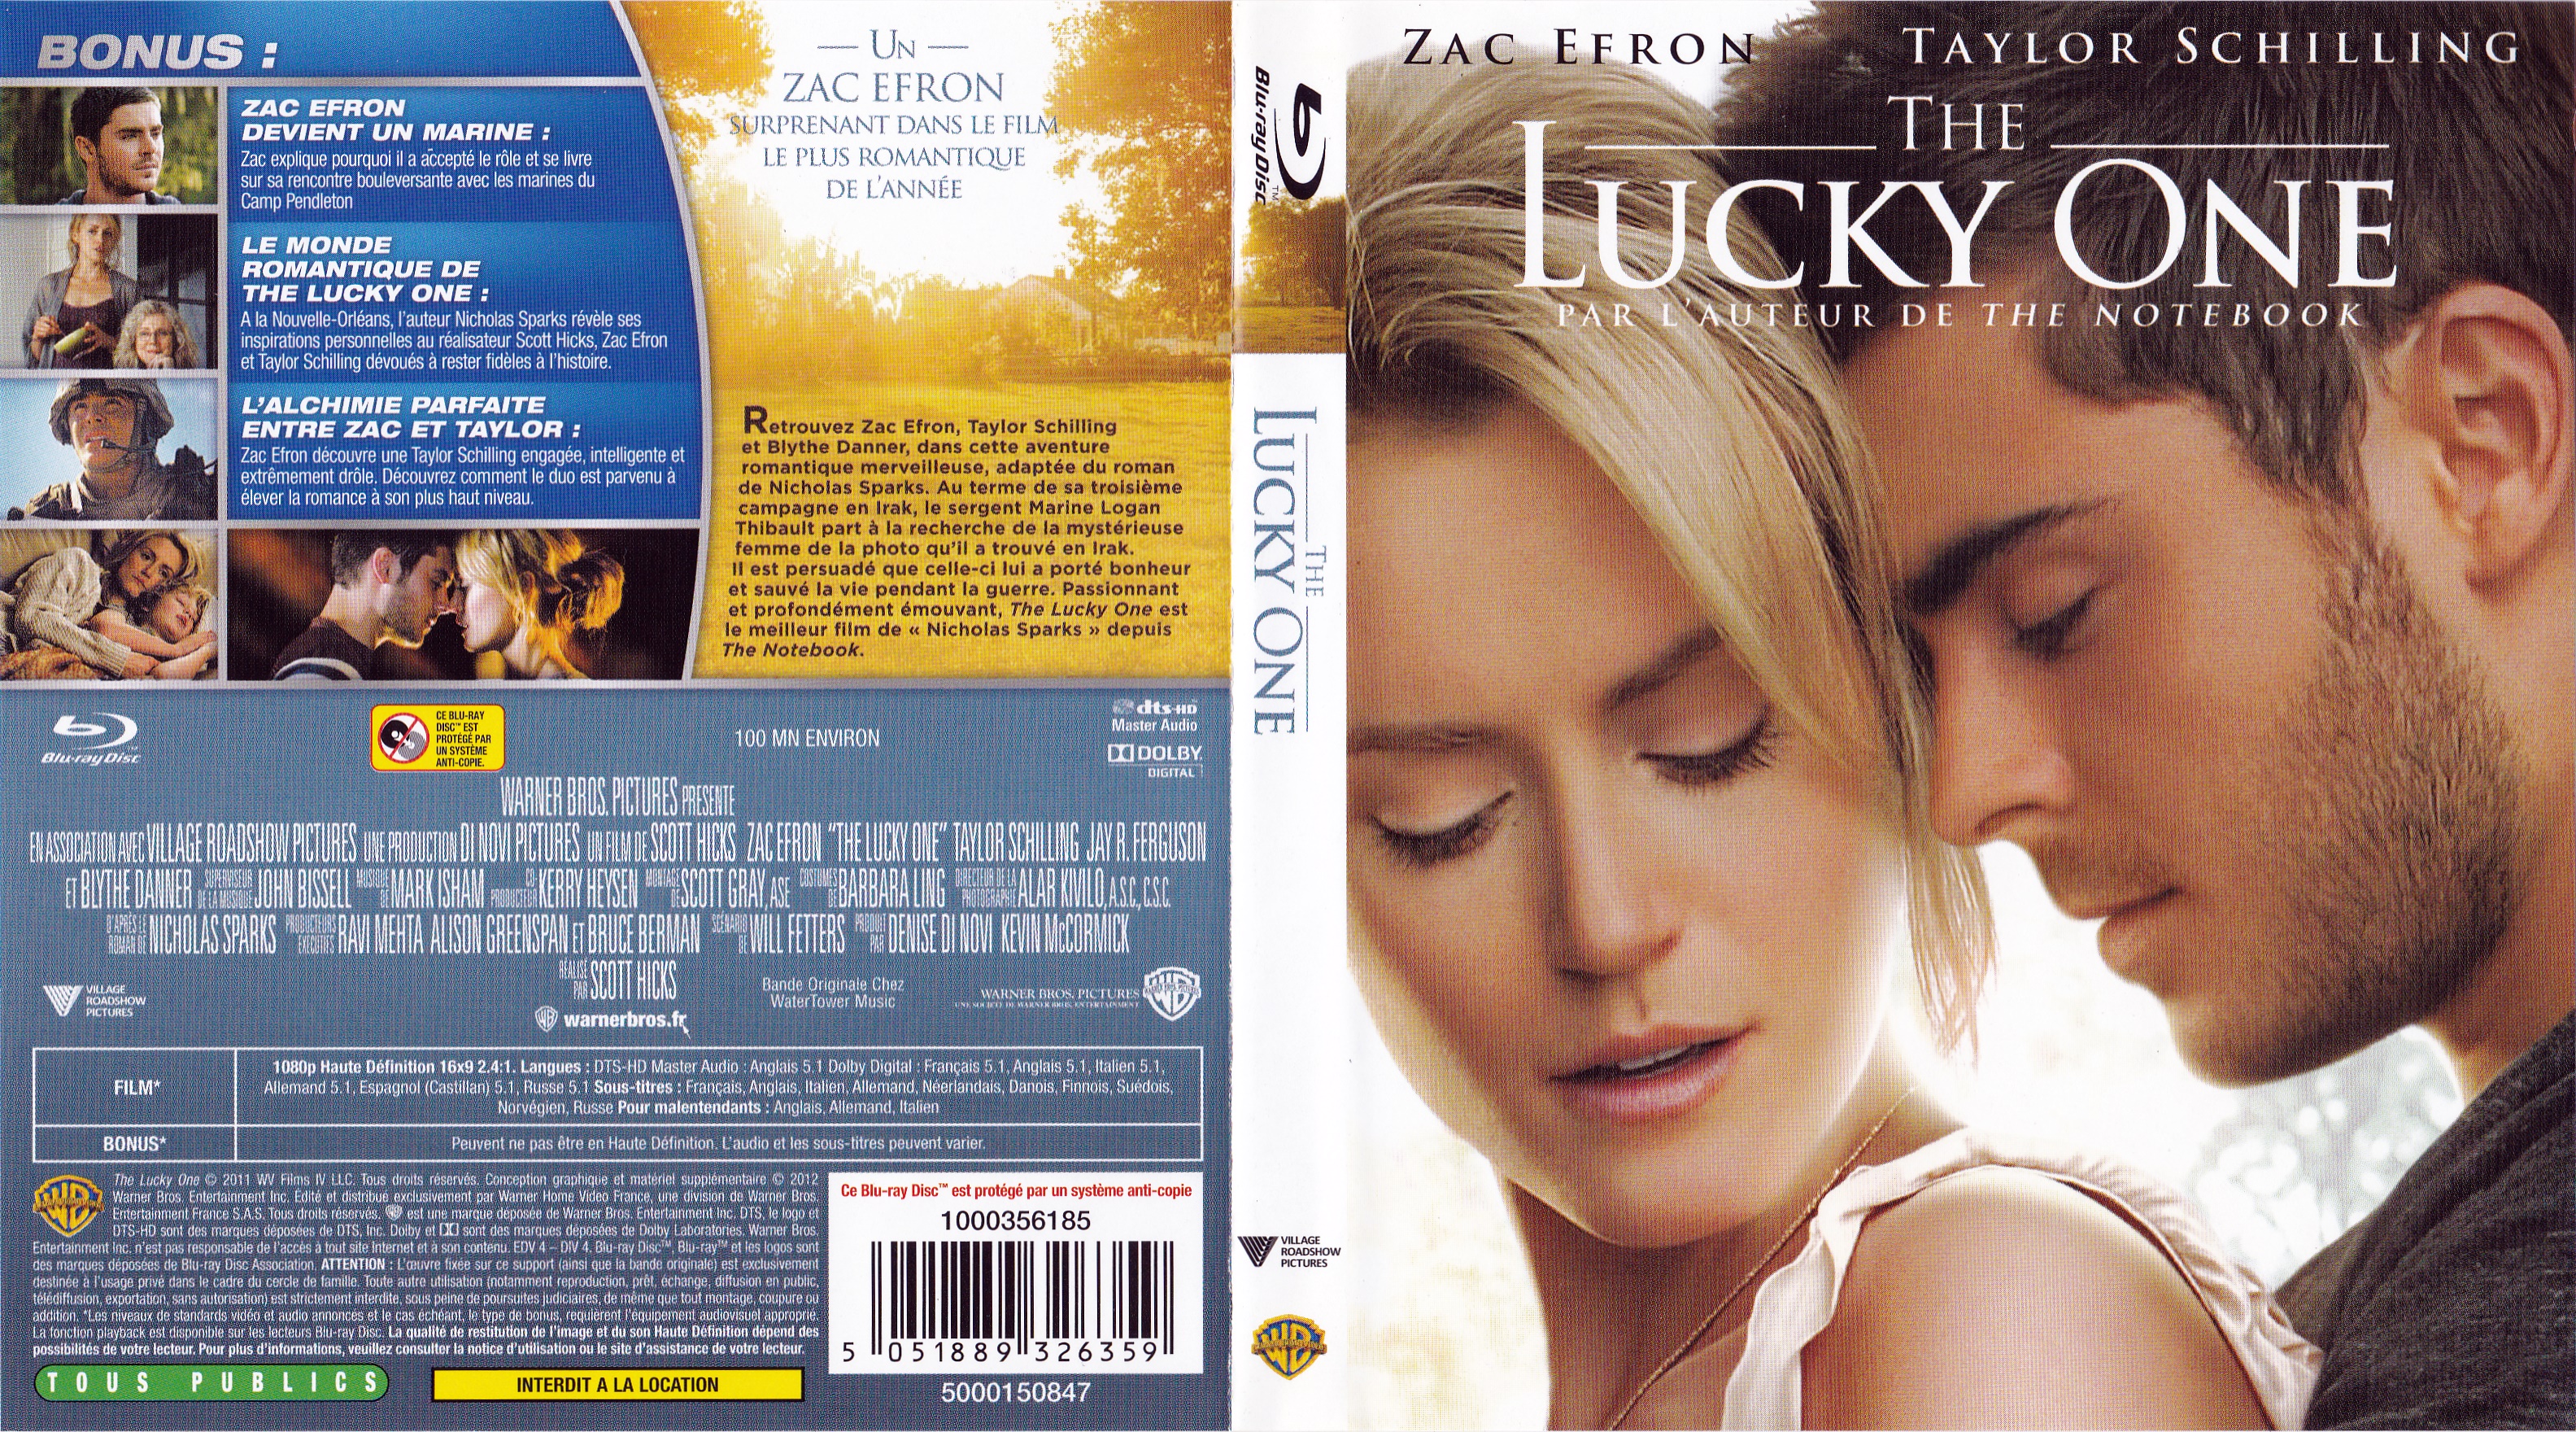 Jaquette DVD The lucky one (BLU-RAY)